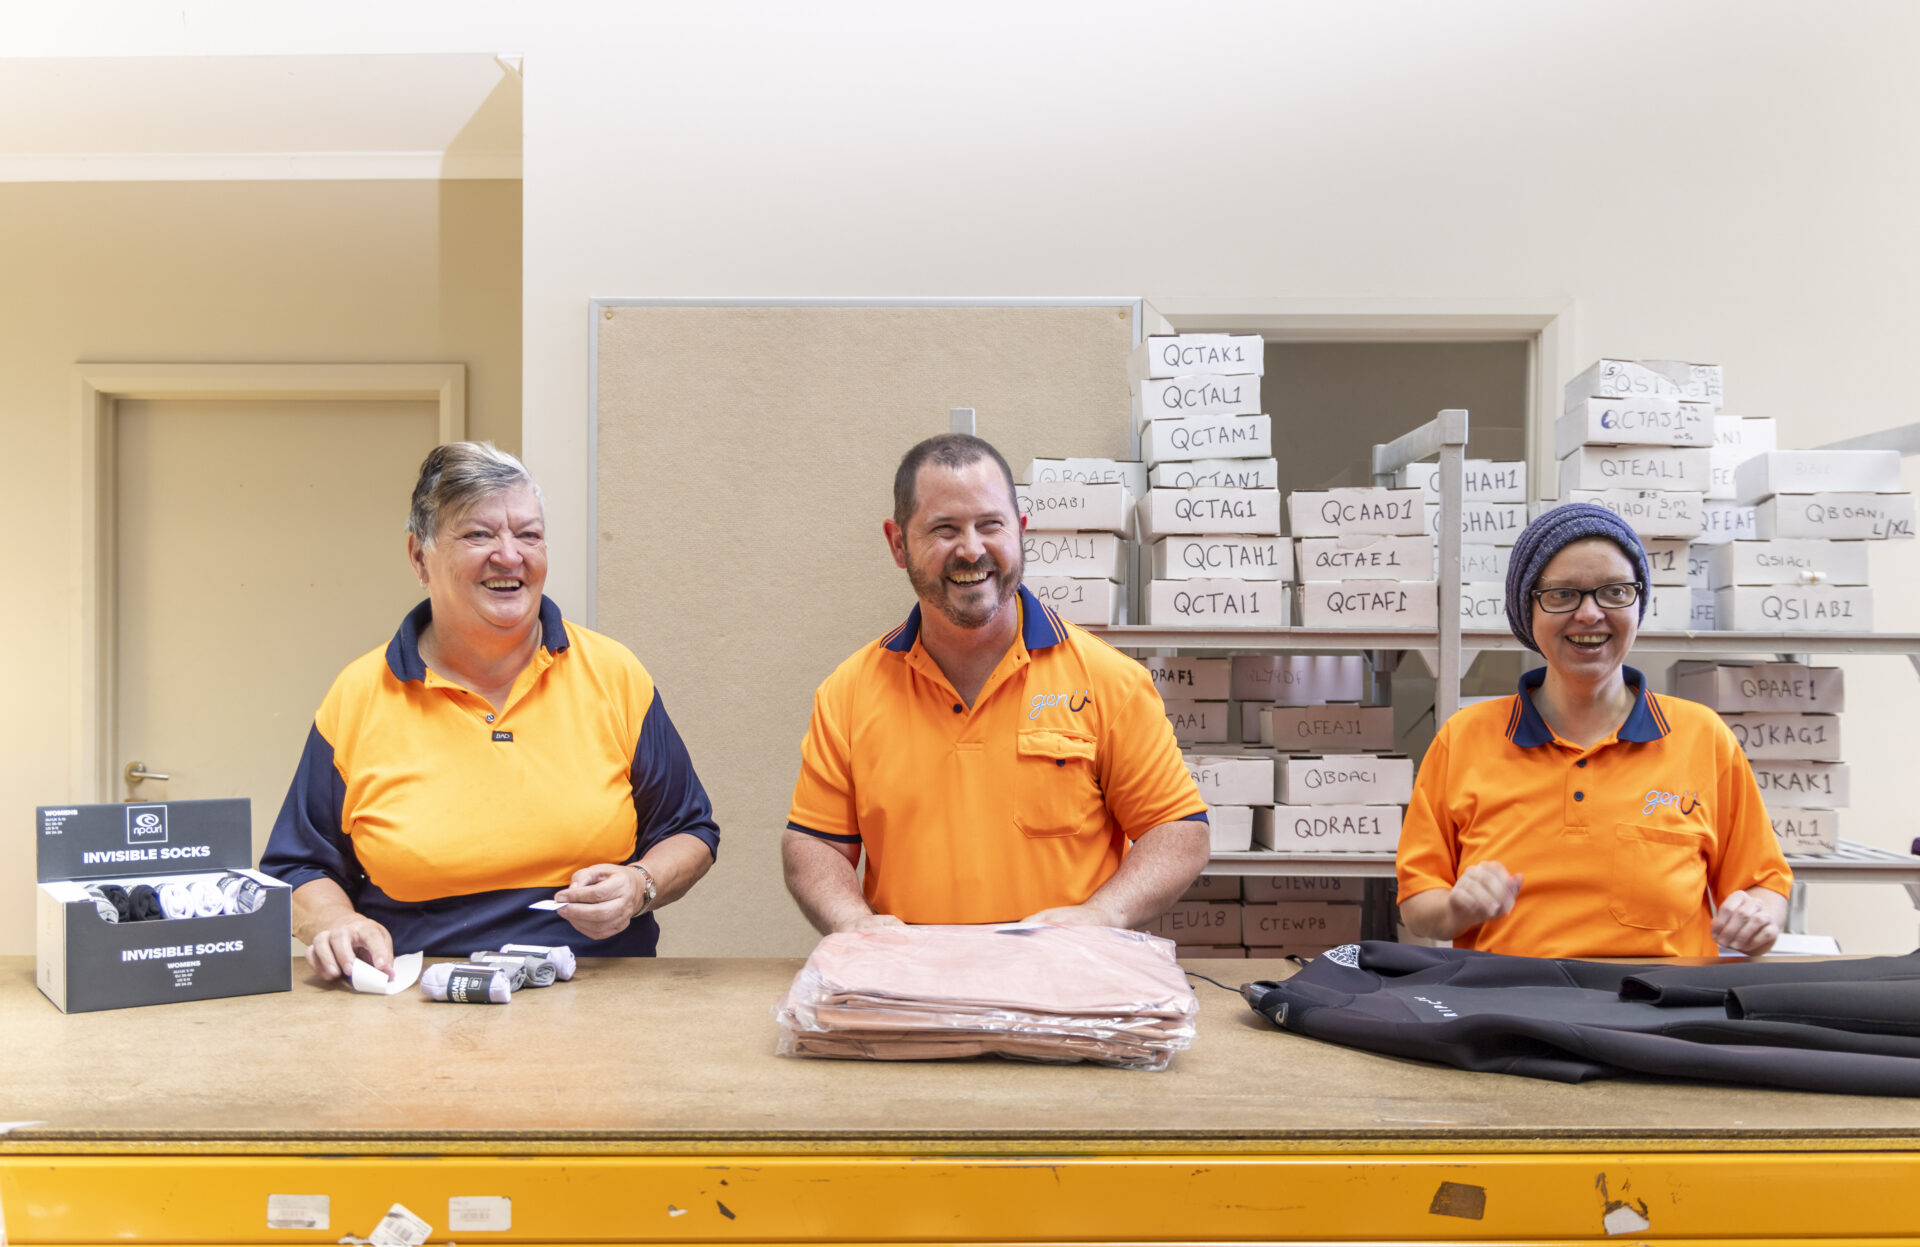 A smiling Andrew with two female supported colleagues who are also smiling at a warehouse facility packing Rip Curl wetsuits, socks and clothing.